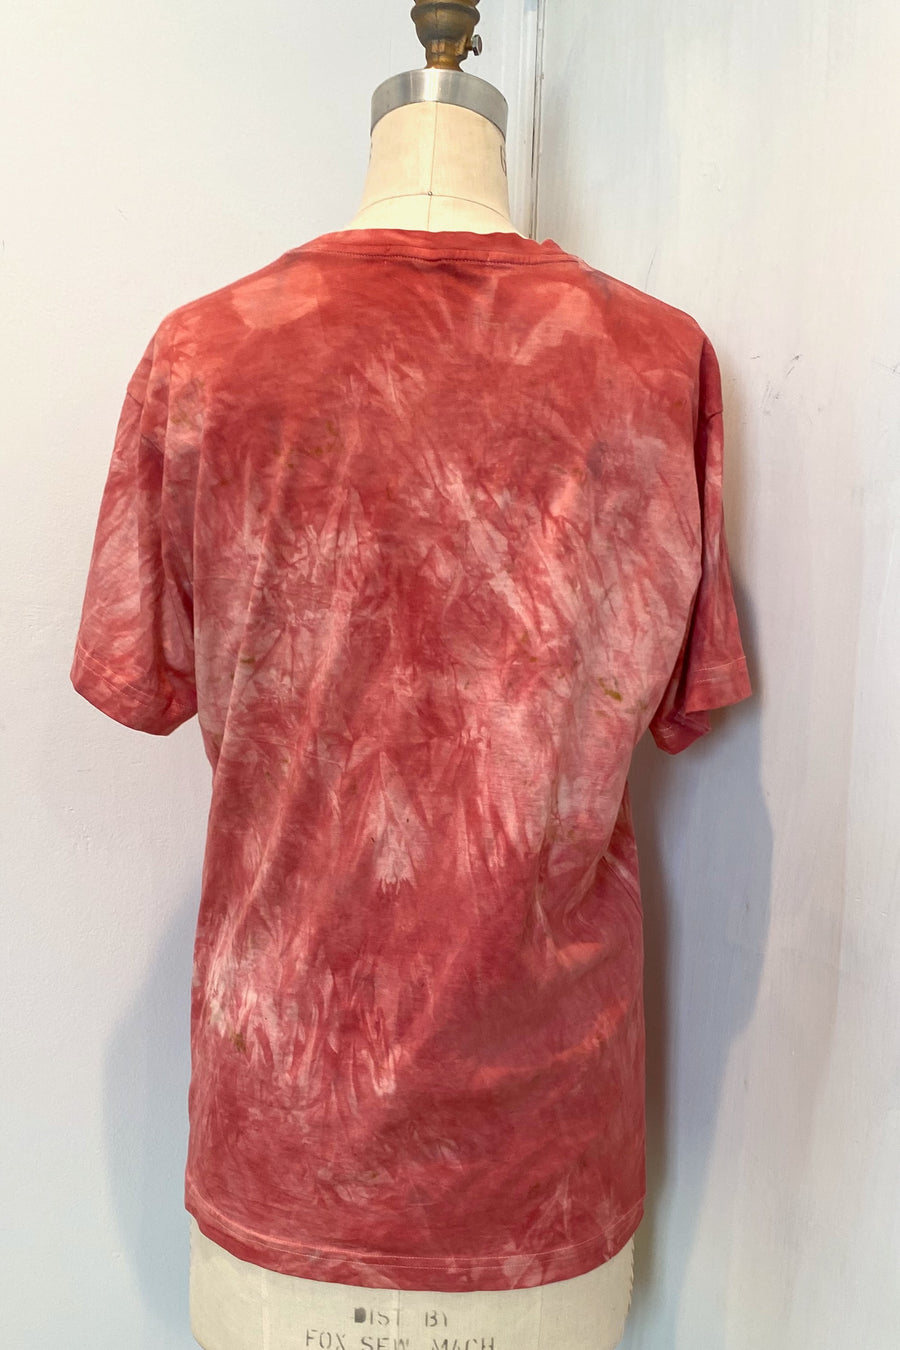 T shirt in Coral